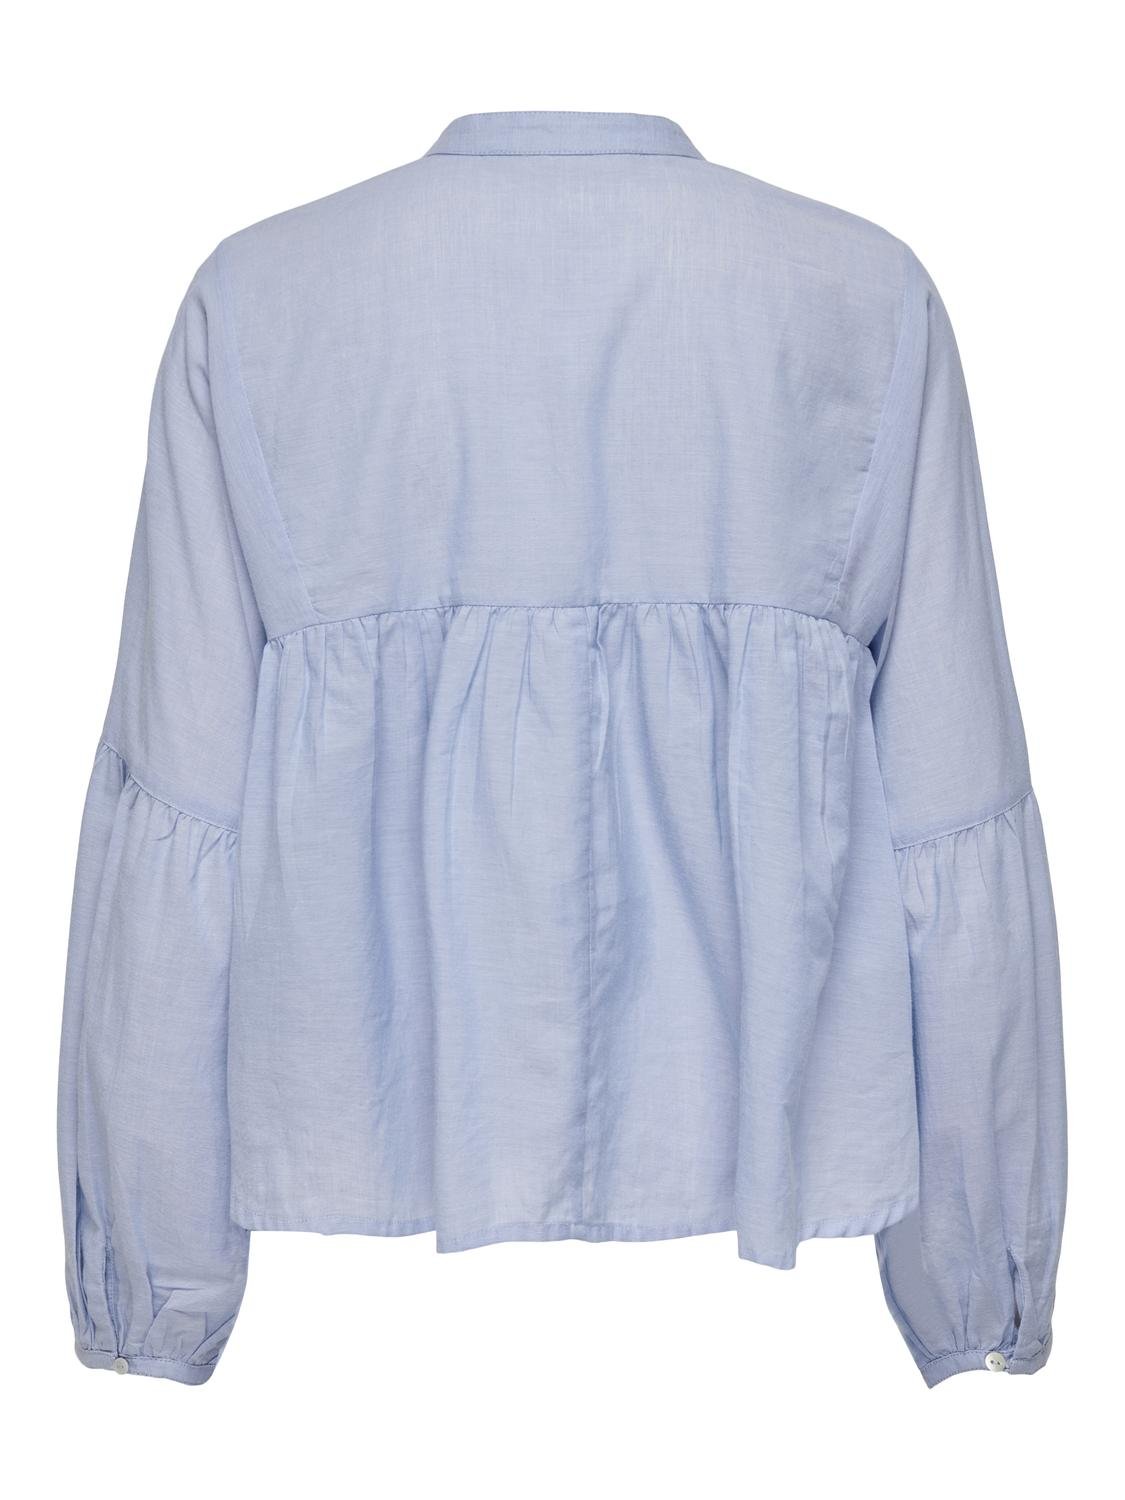 PGLESSY T-Shirts & Tops - Cashmere Blue